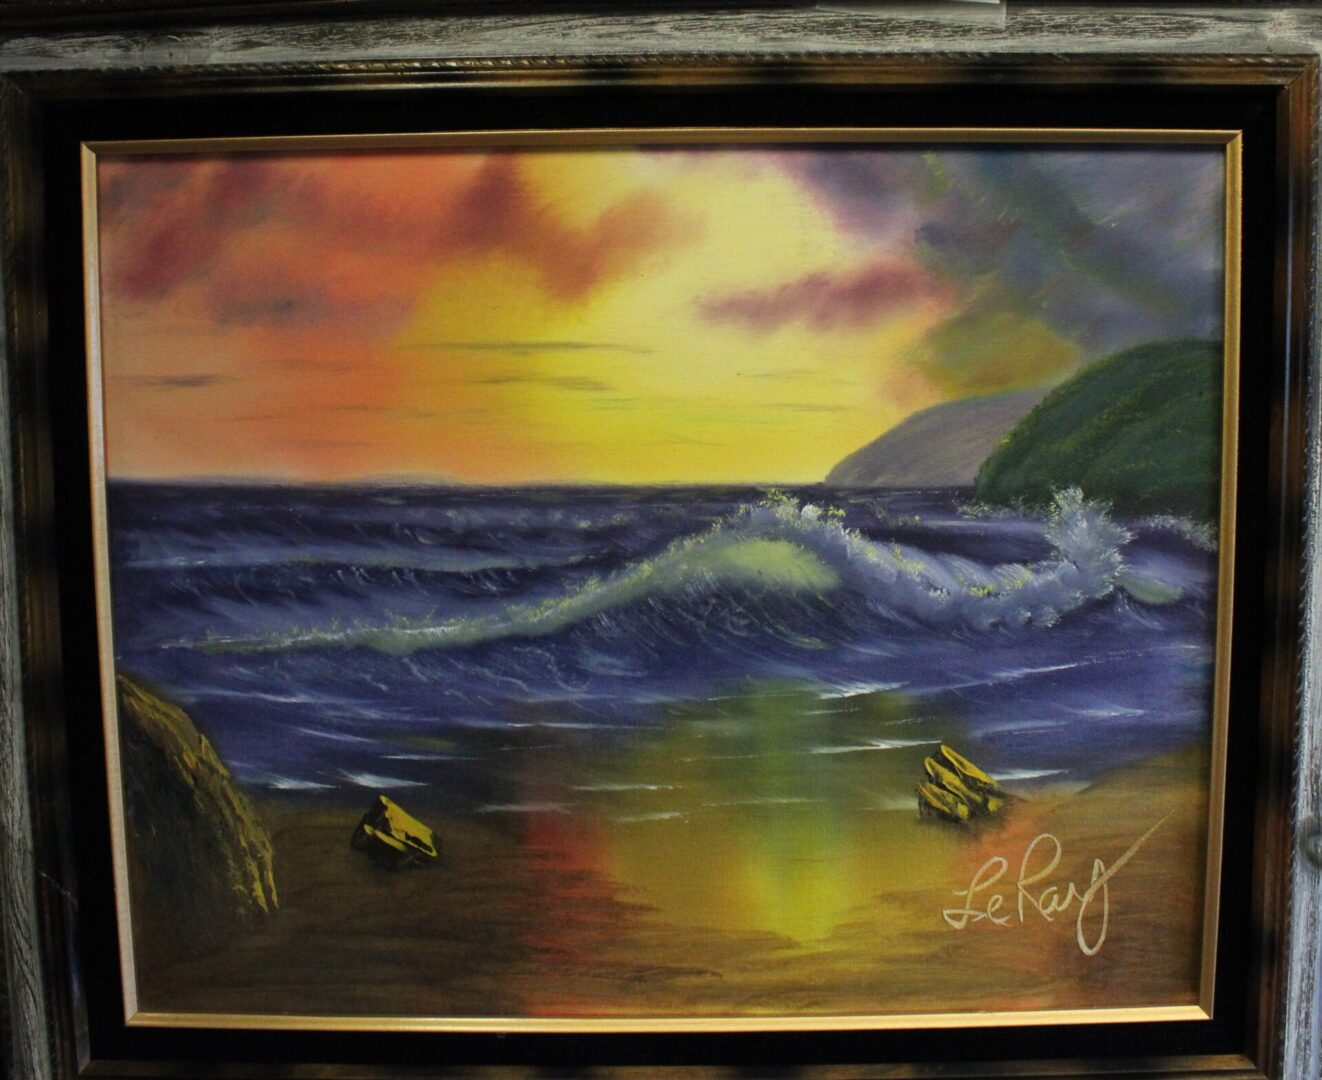 A painting of a Golden Sunset beach scene with waves crashing.